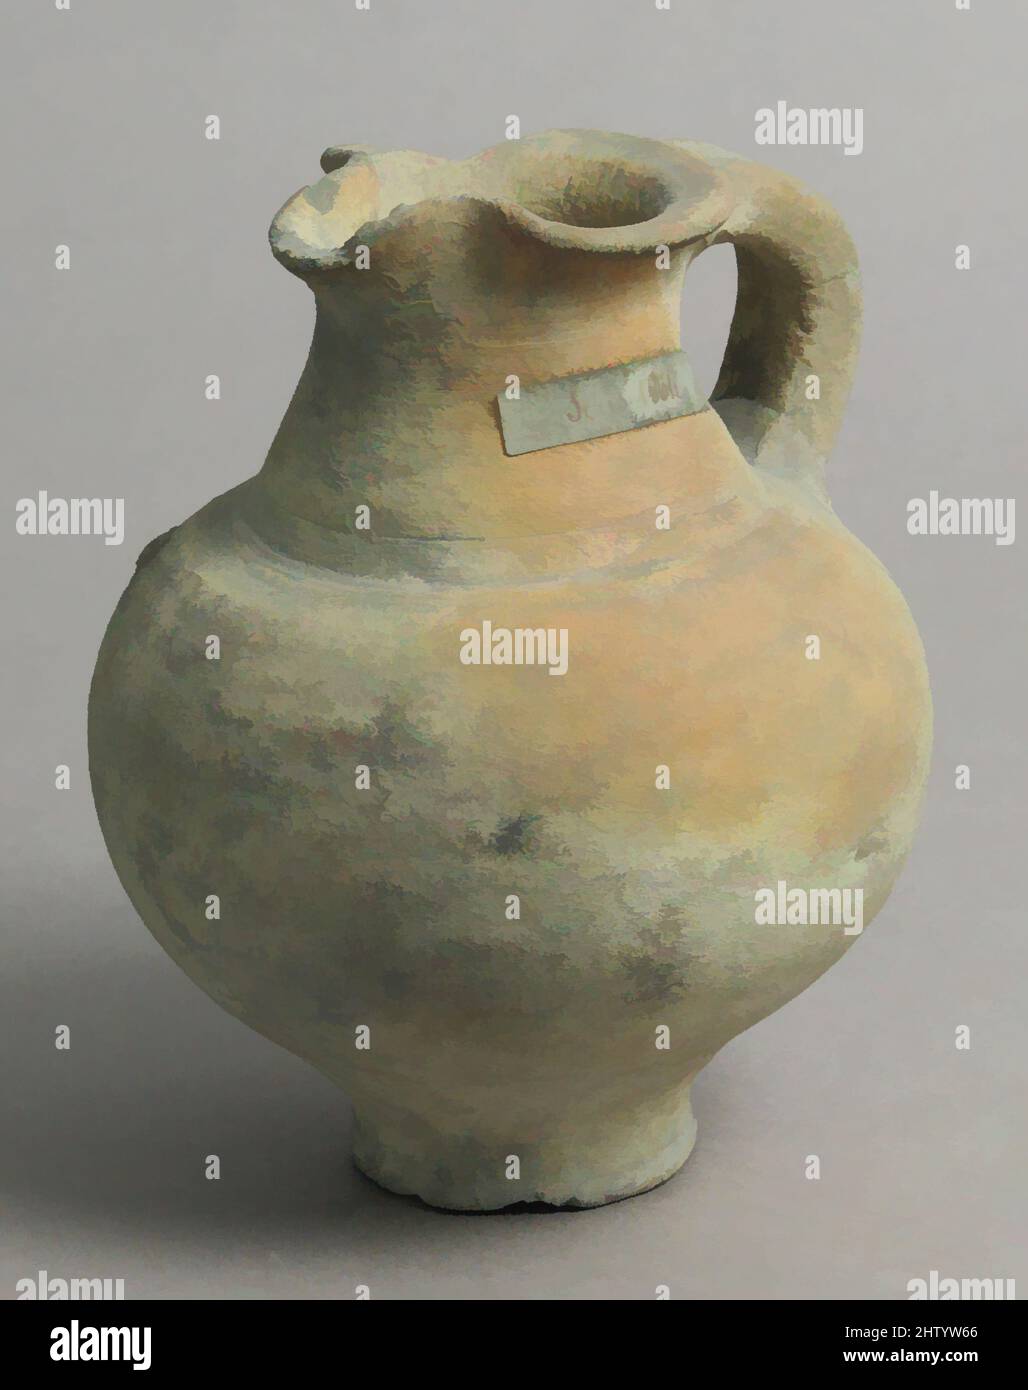 Art inspired by Jug, 15th century, French, Earthenware, Overall: 5 9/16 x 4 7/16 in. (14.2 x 11.2 cm), Ceramics, Classic works modernized by Artotop with a splash of modernity. Shapes, color and value, eye-catching visual impact on art. Emotions through freedom of artworks in a contemporary way. A timeless message pursuing a wildly creative new direction. Artists turning to the digital medium and creating the Artotop NFT Stock Photo